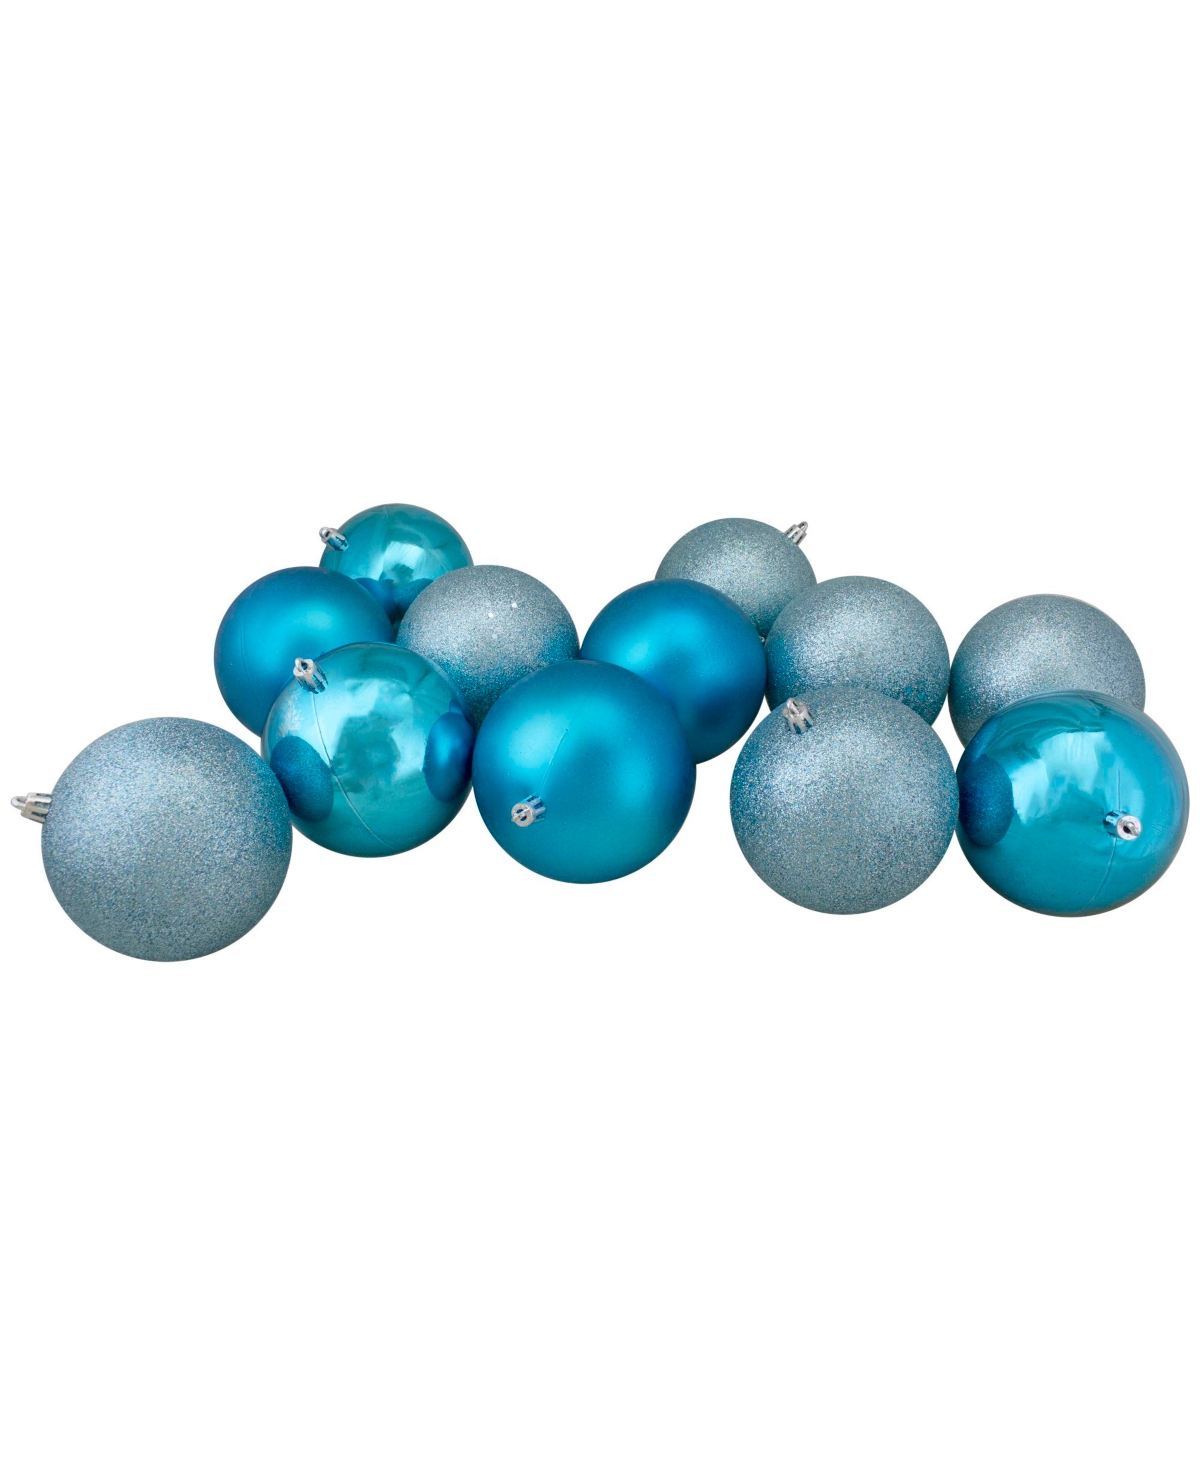 Northlight 32 Count Shatterproof 4-finish Christmas Ball Ornaments 80mm Set, 3.25" In Blue